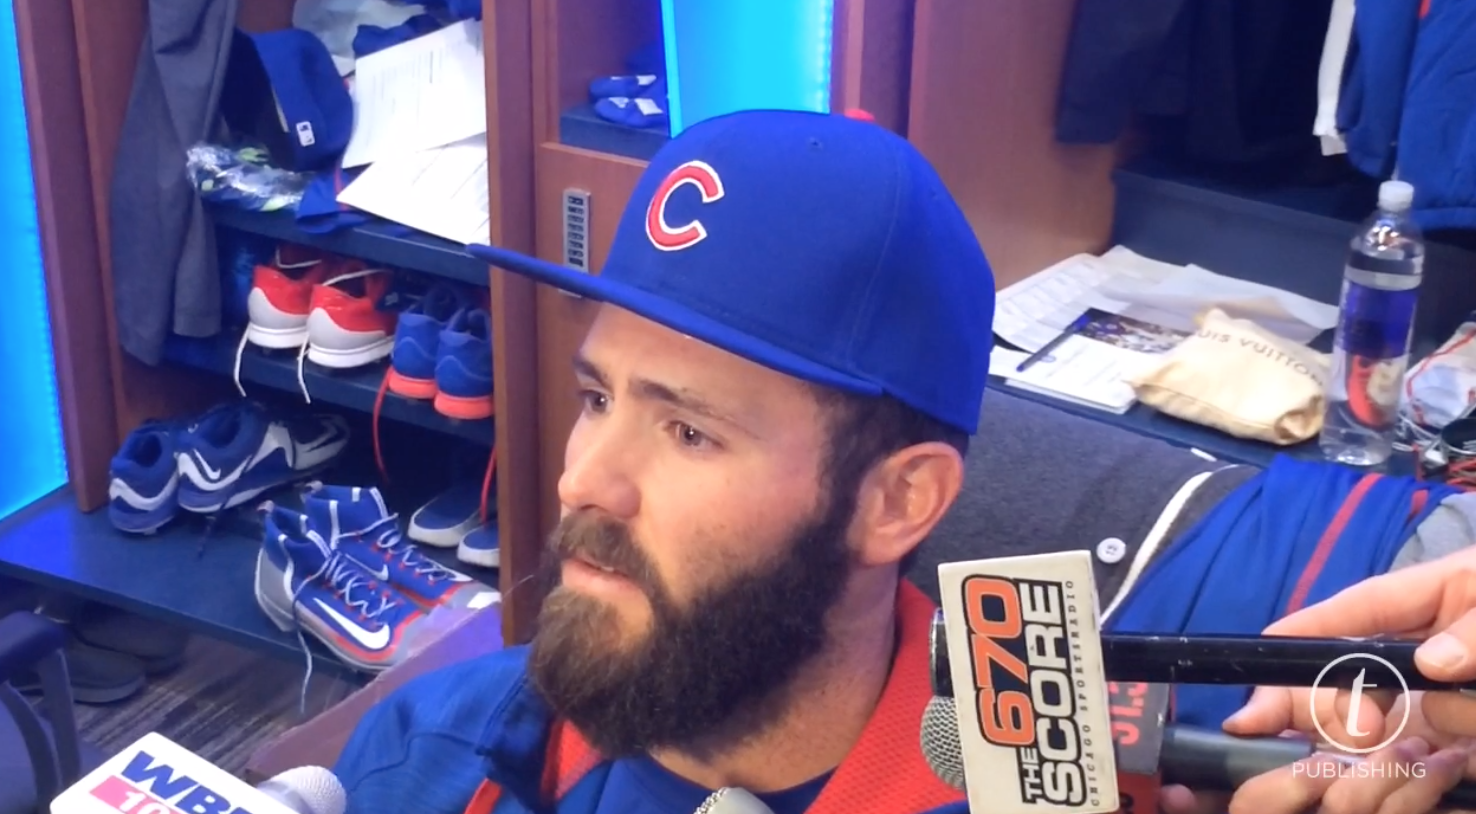 Cubs ace Jake Arrieta laughs off talk PEDs fueled turnaround